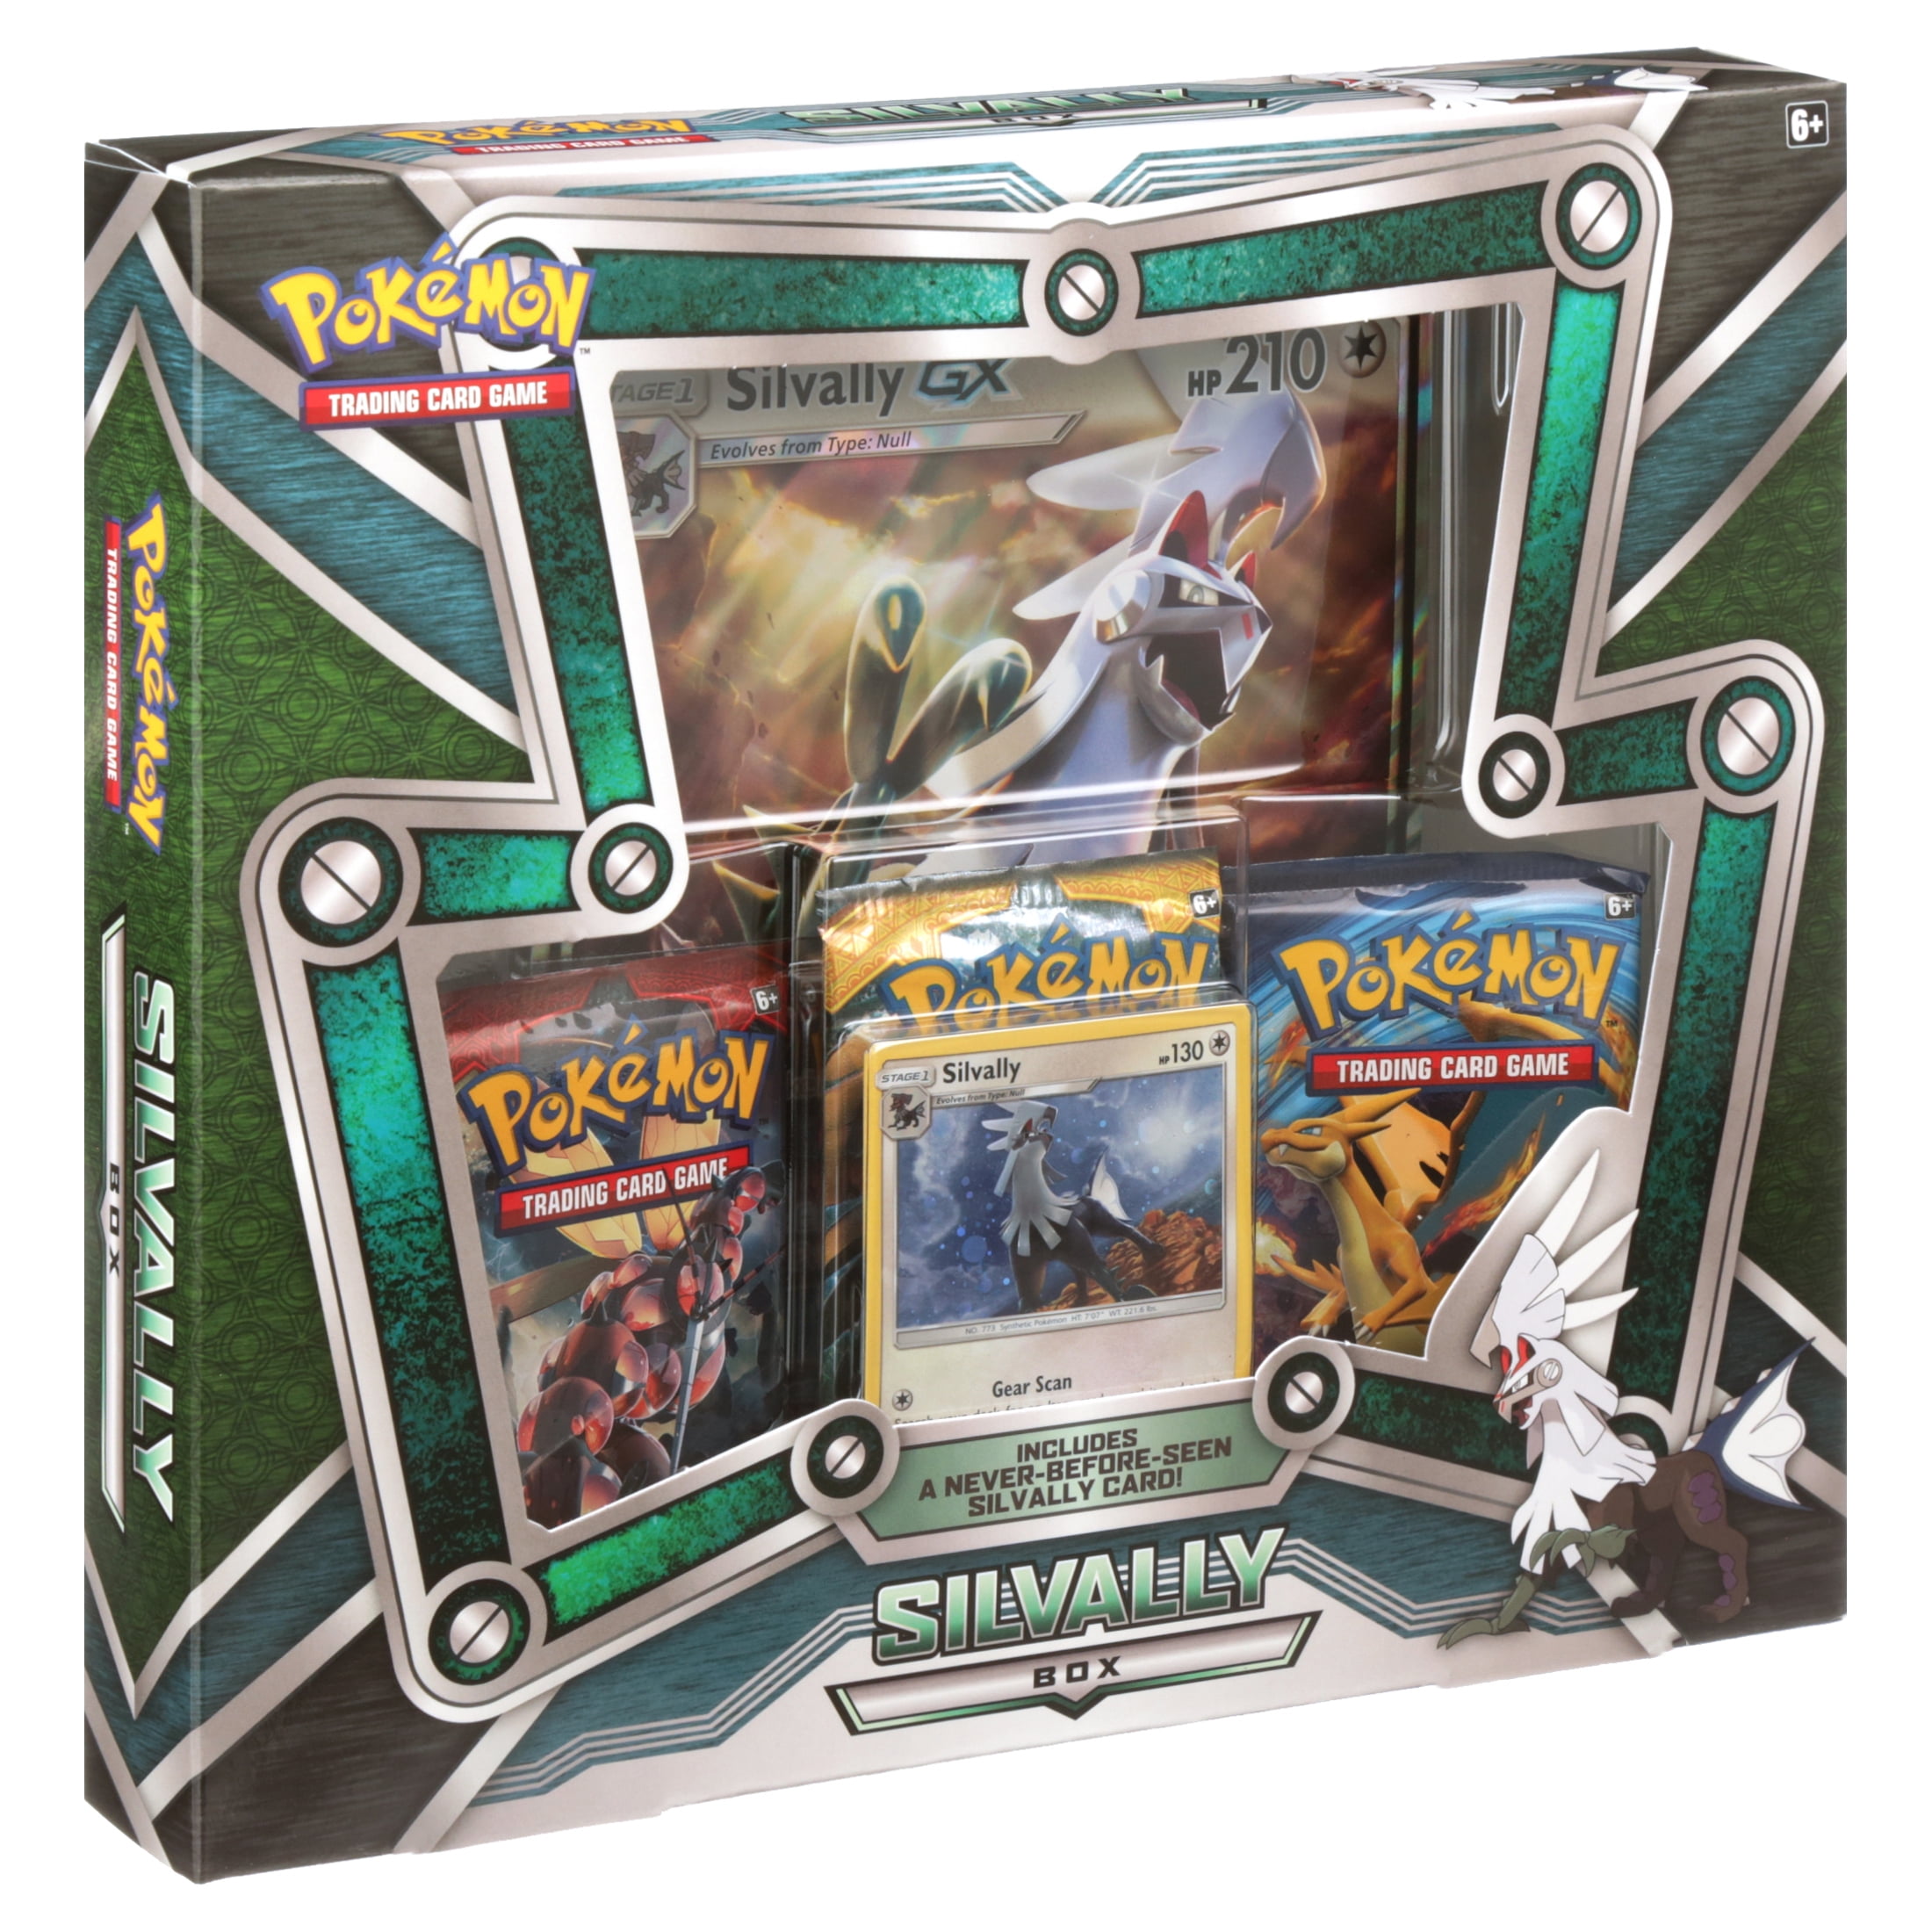 NULL & SILVALLY NEW for sale online Pokémon SWORD & SHIELD 10 Card Booster Blister TYPE 